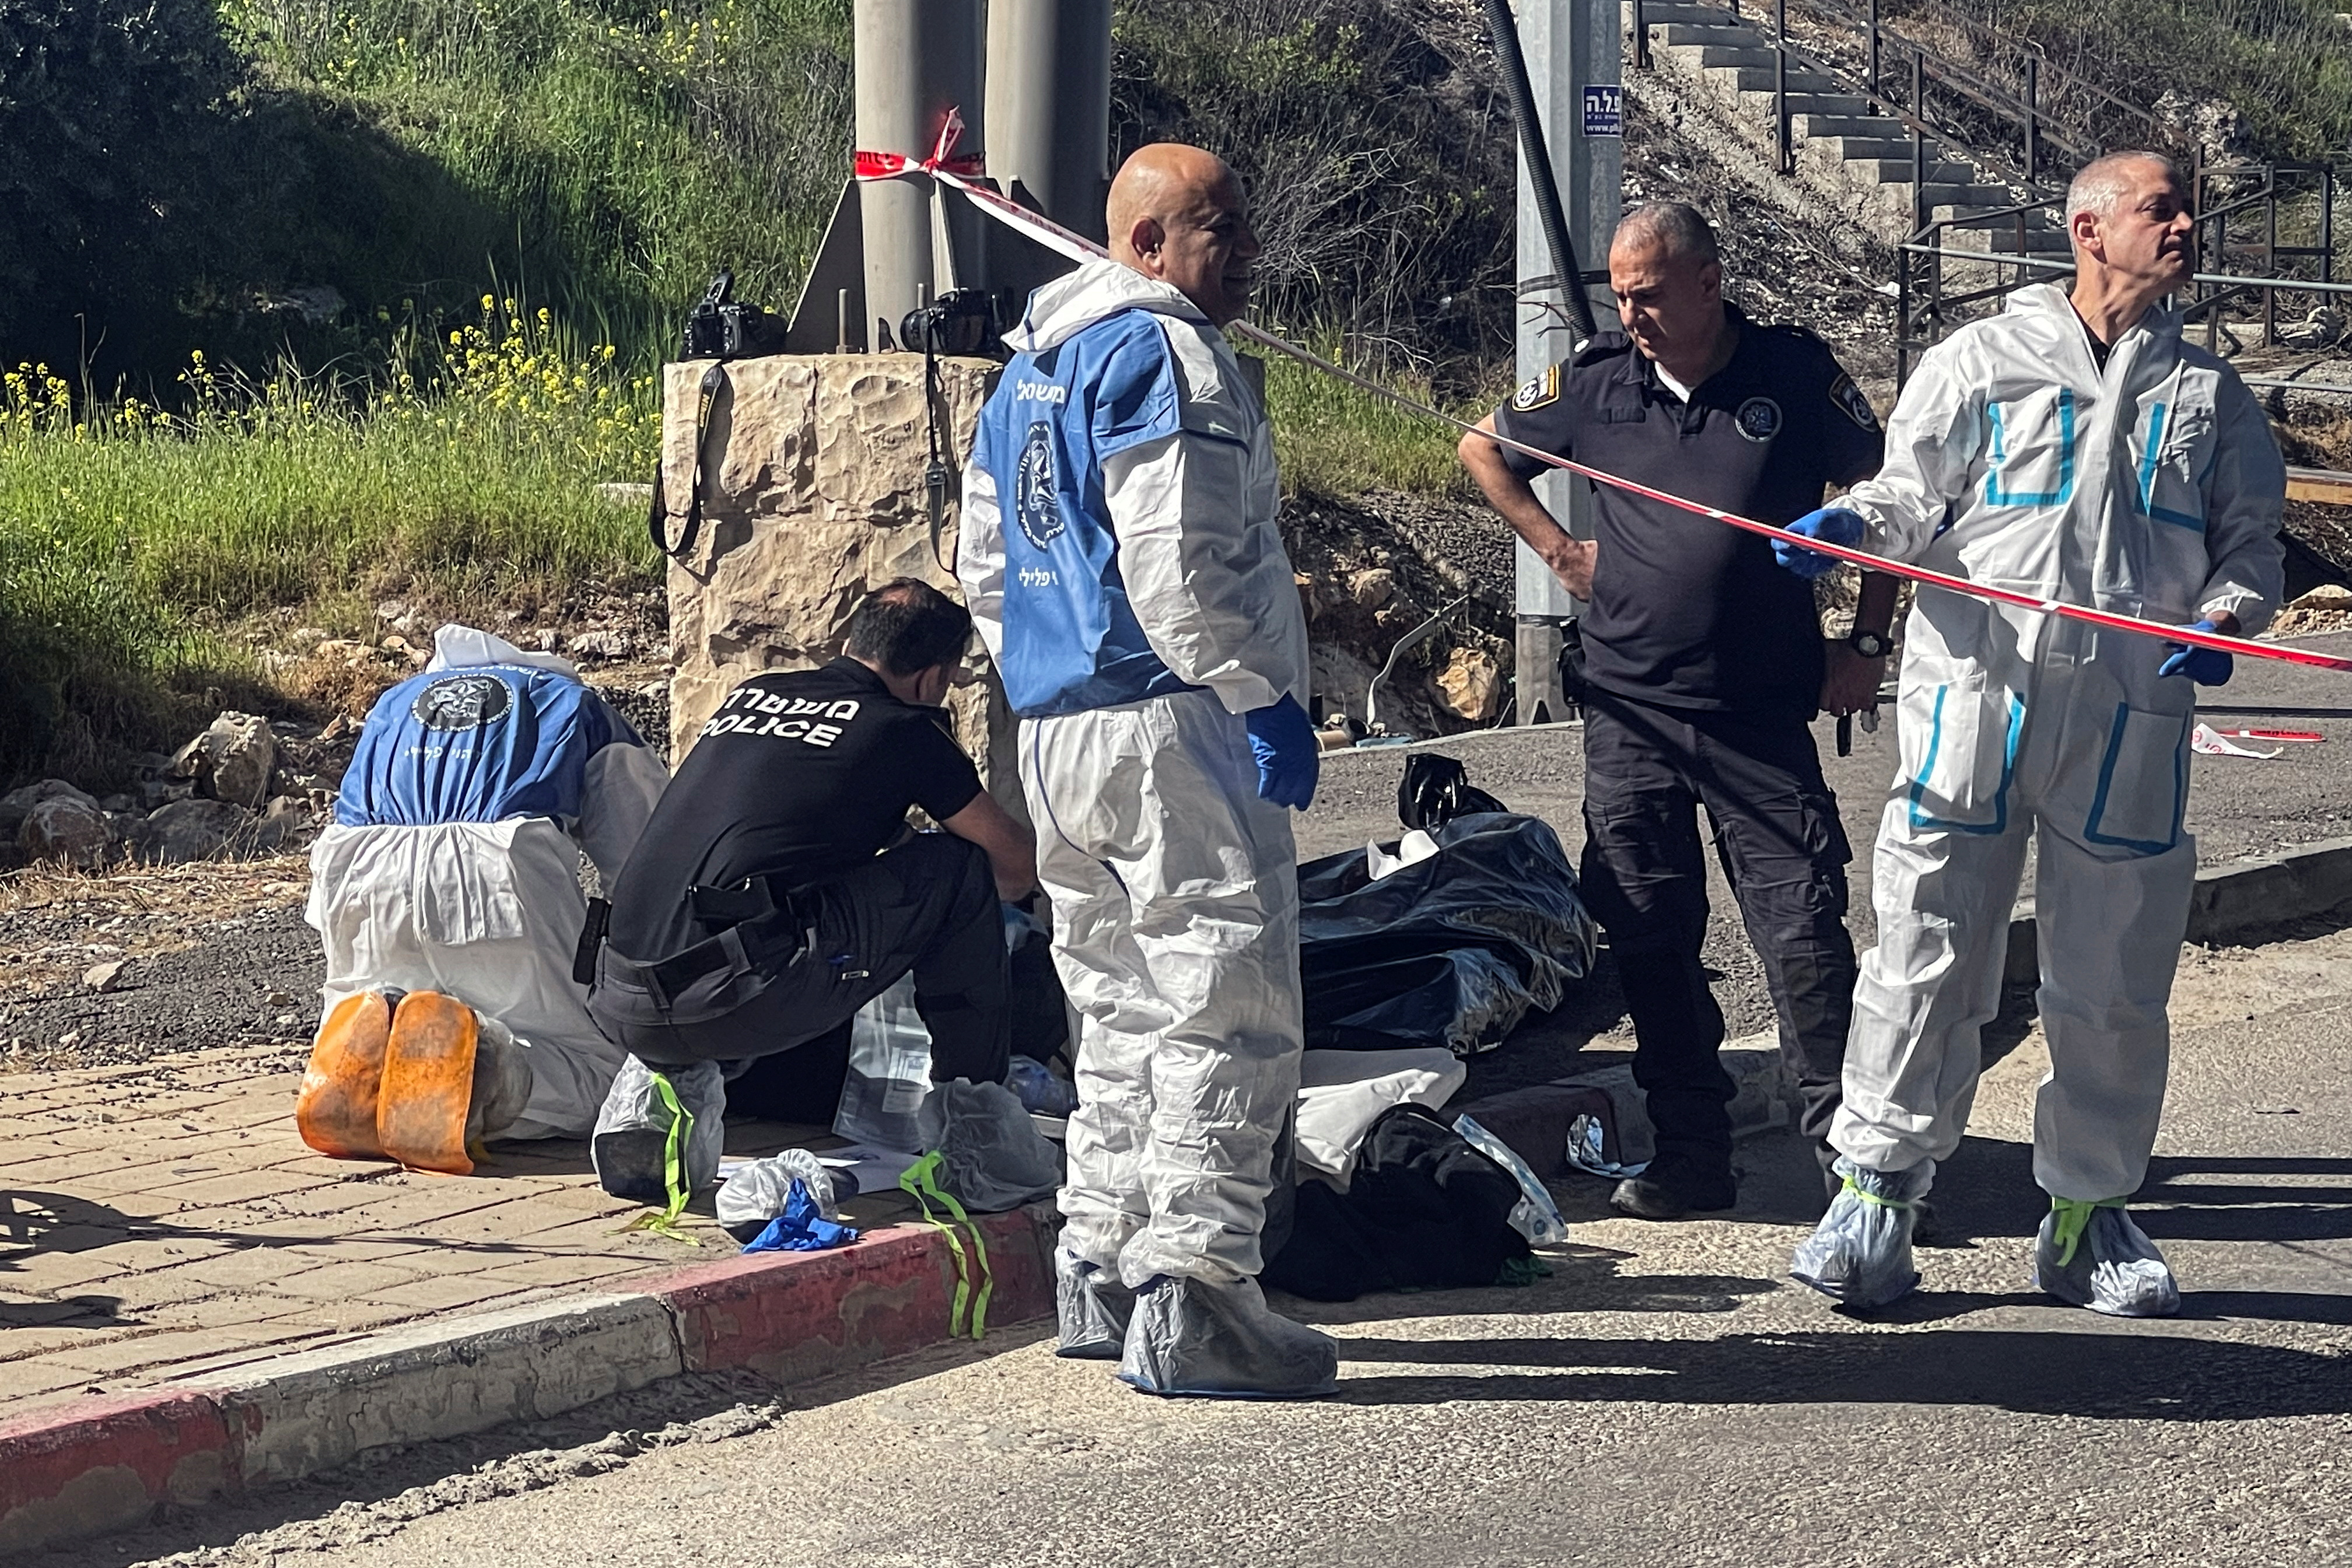 A suspected attack at a checkpoint outside of Jerusalem, in the Israeli-occupied West Bank